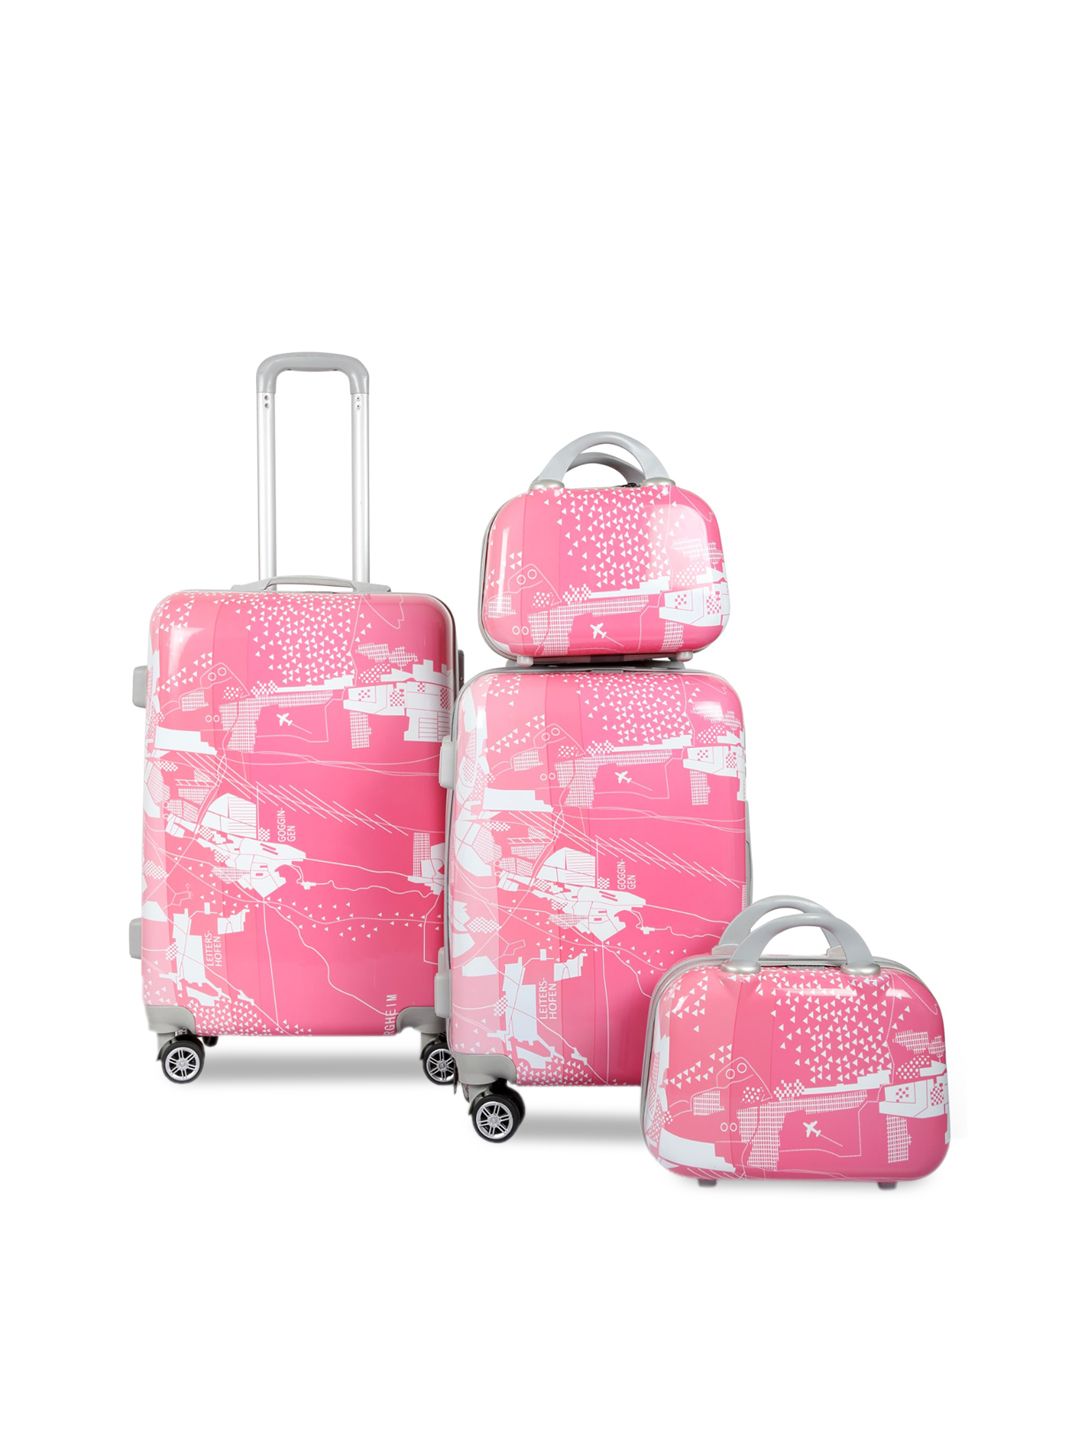 Polo Class Set of 2 Pink Travel Trolley Bag with 2 Vanity Bag Price in India